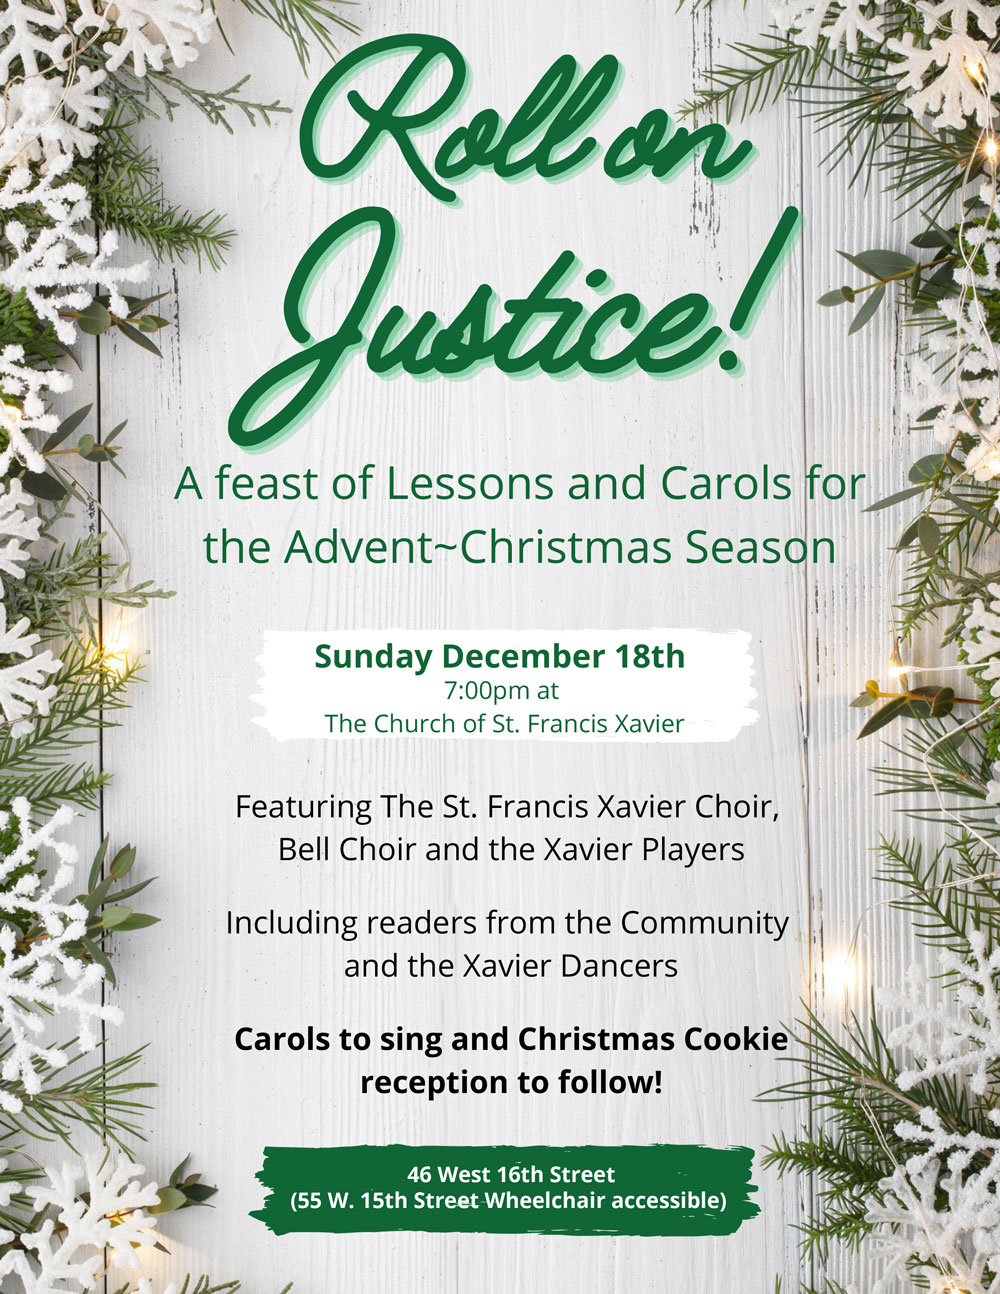 Lessons and Carols Poster